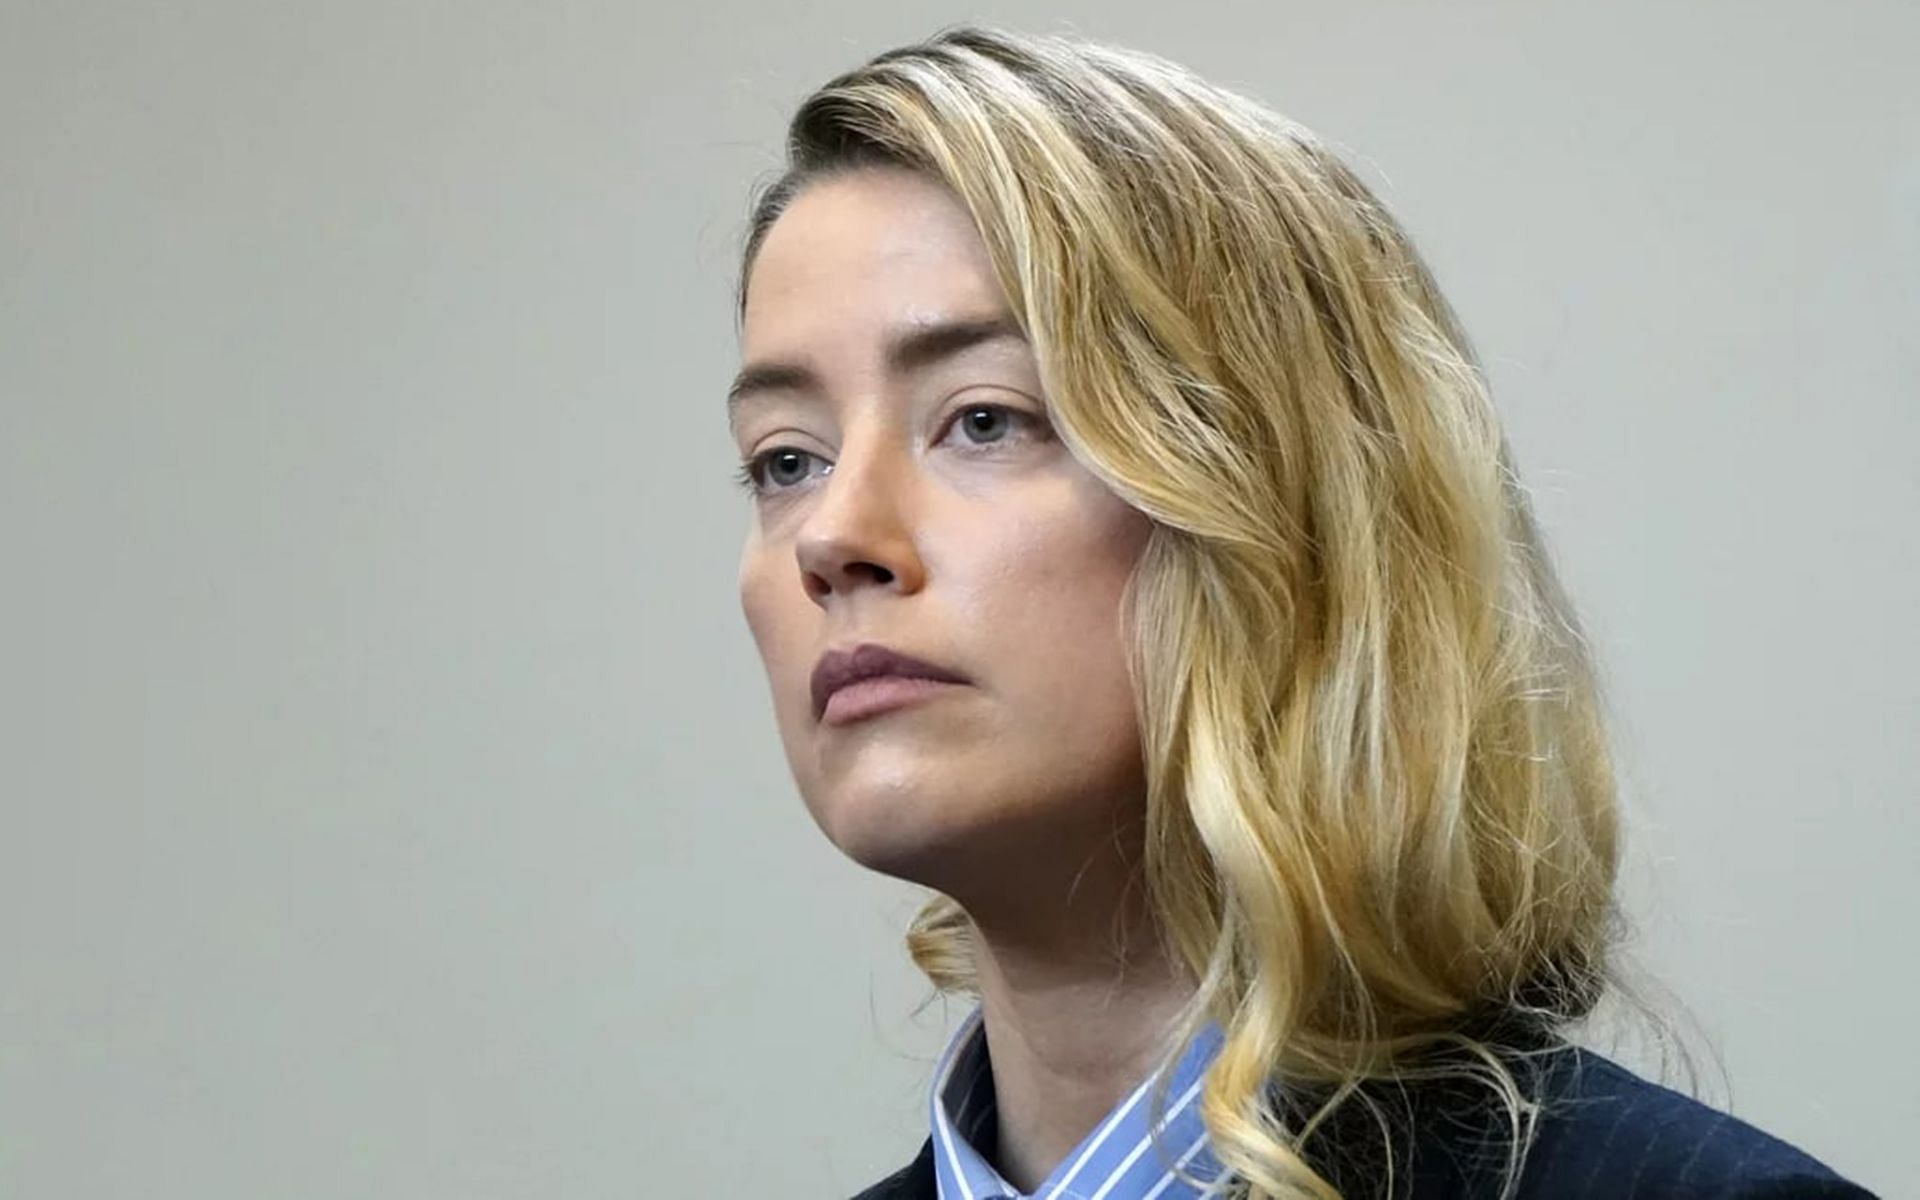 The Amber Heard- Johnny Depp trial has been getting a lot of attention. Image via Getty